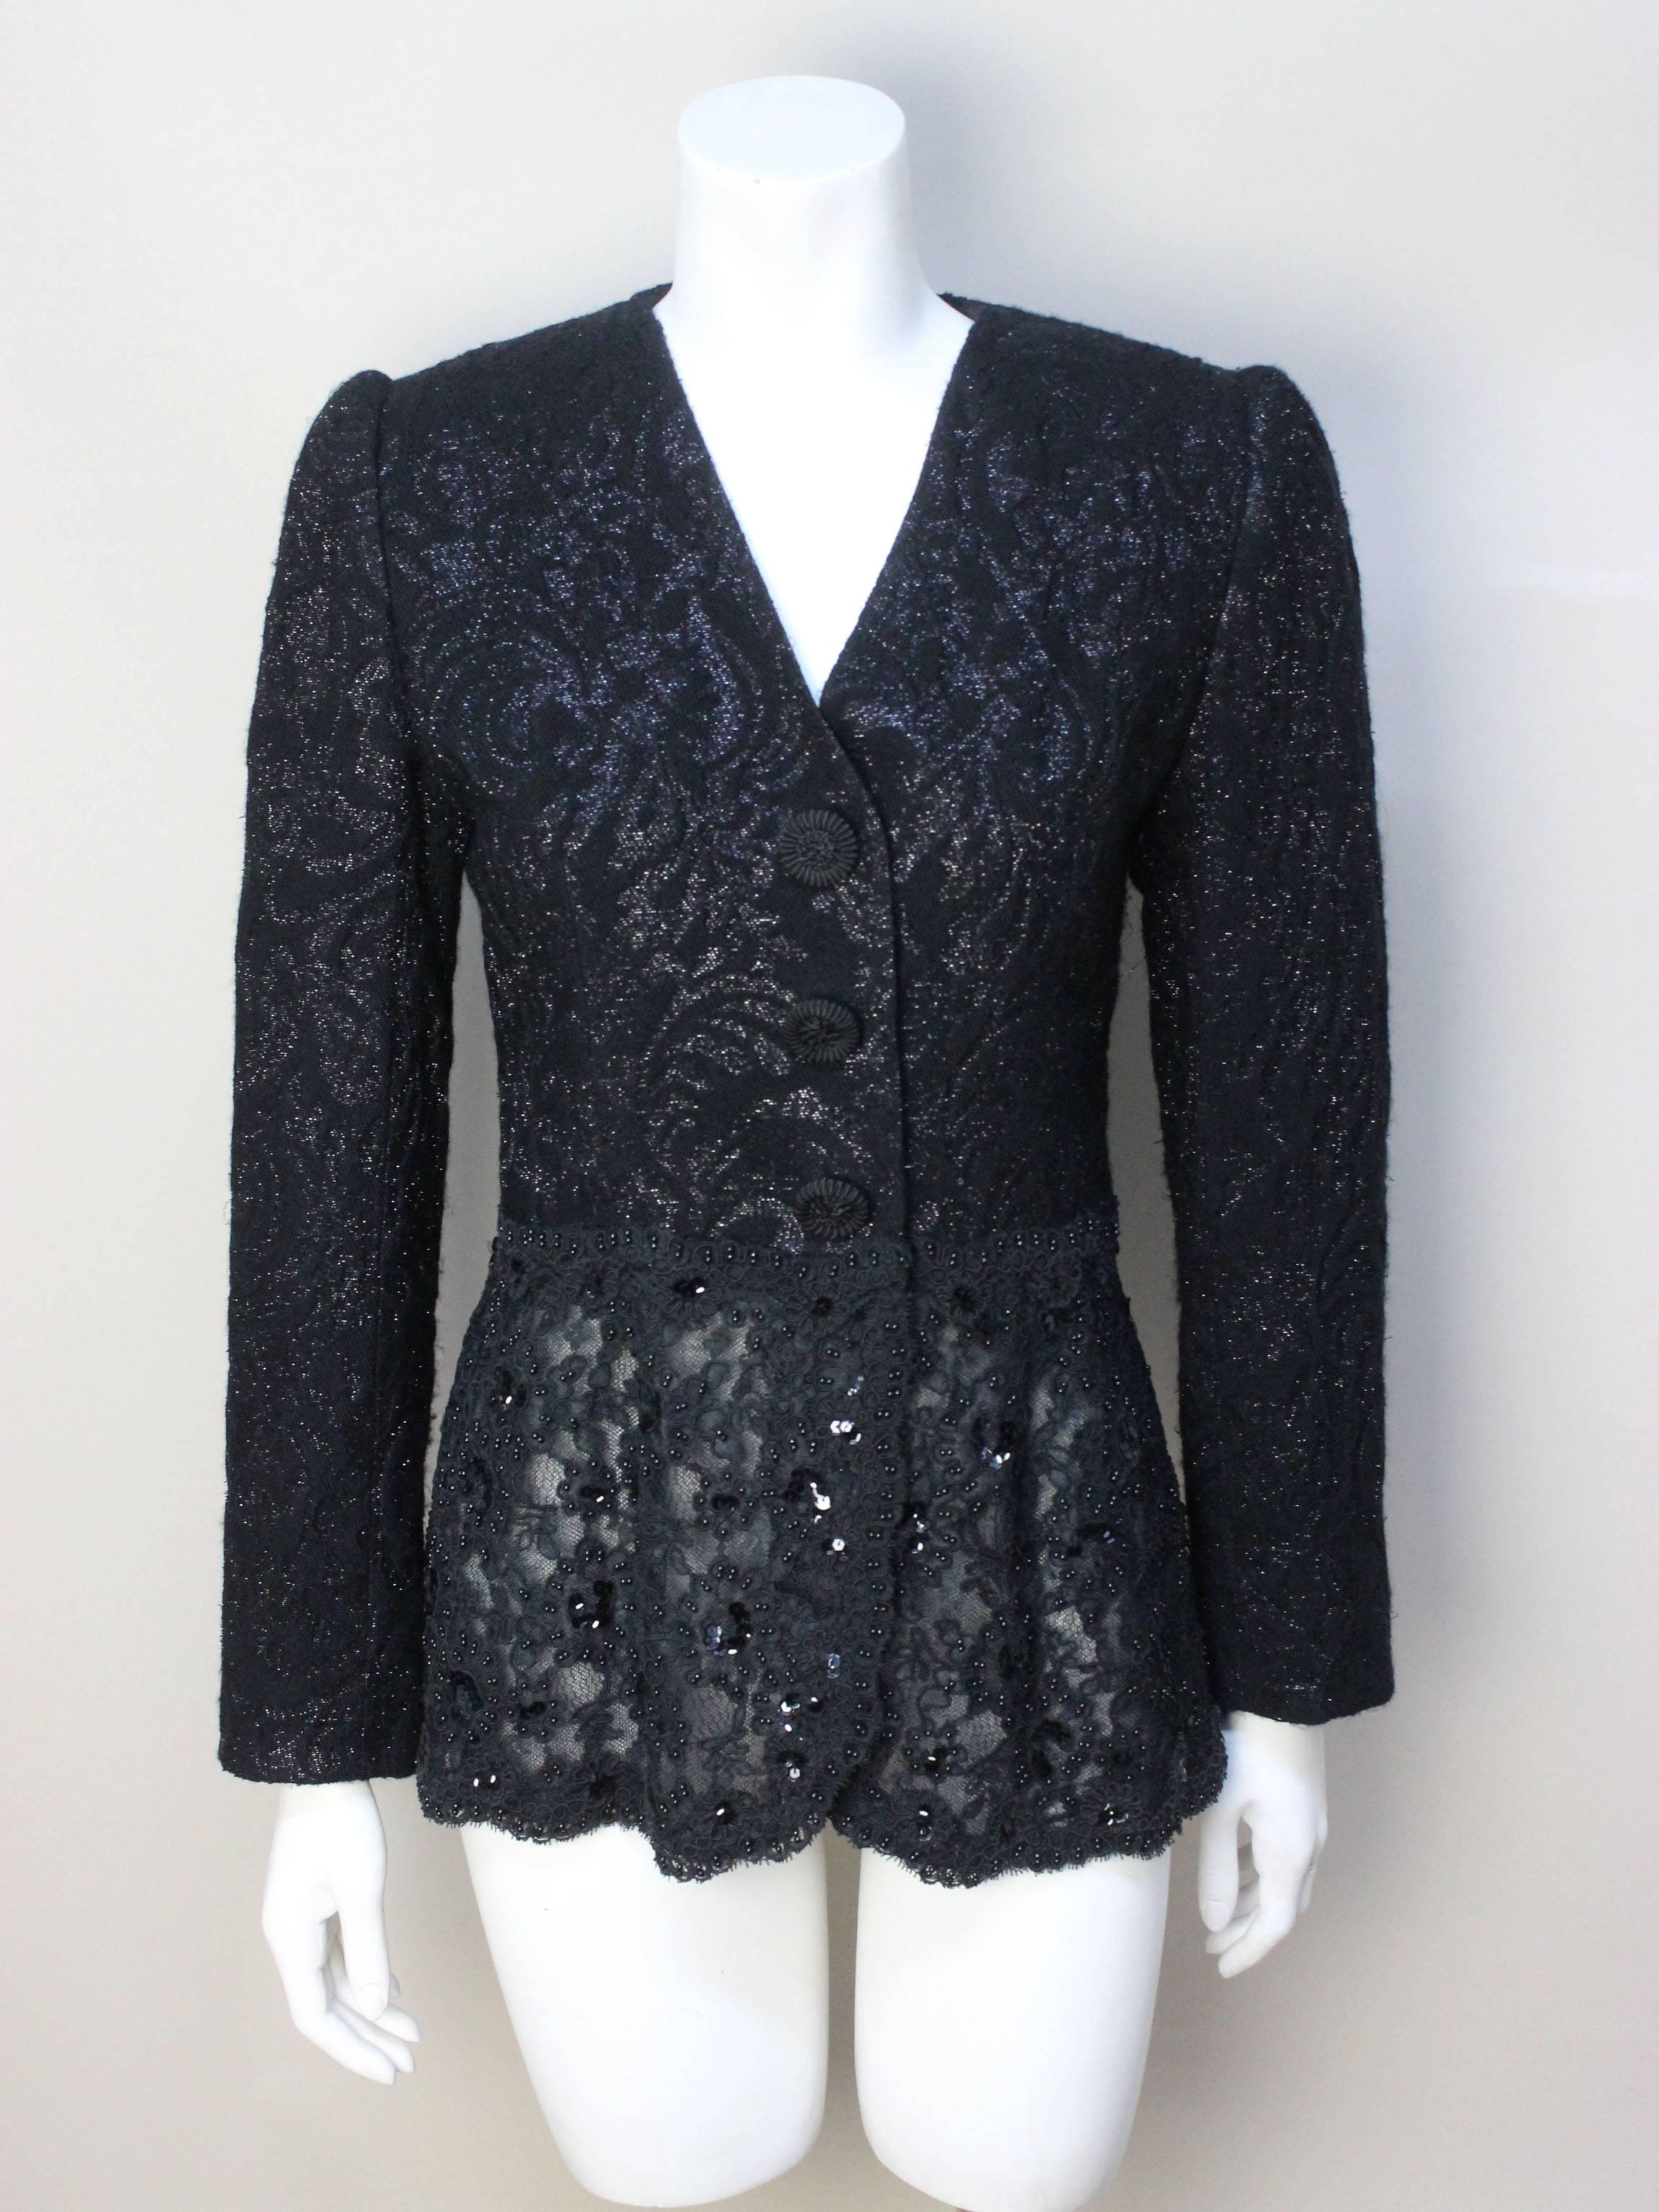 This beautiful 1980s evening jacket ws sold in the designer penthouse of Miss Jacksons, an upscale store in Tulsa. The top half of the jacket is constructed of a metallic wool with a subtle leaf pattern. The bottom half is fine beaded lace. It would